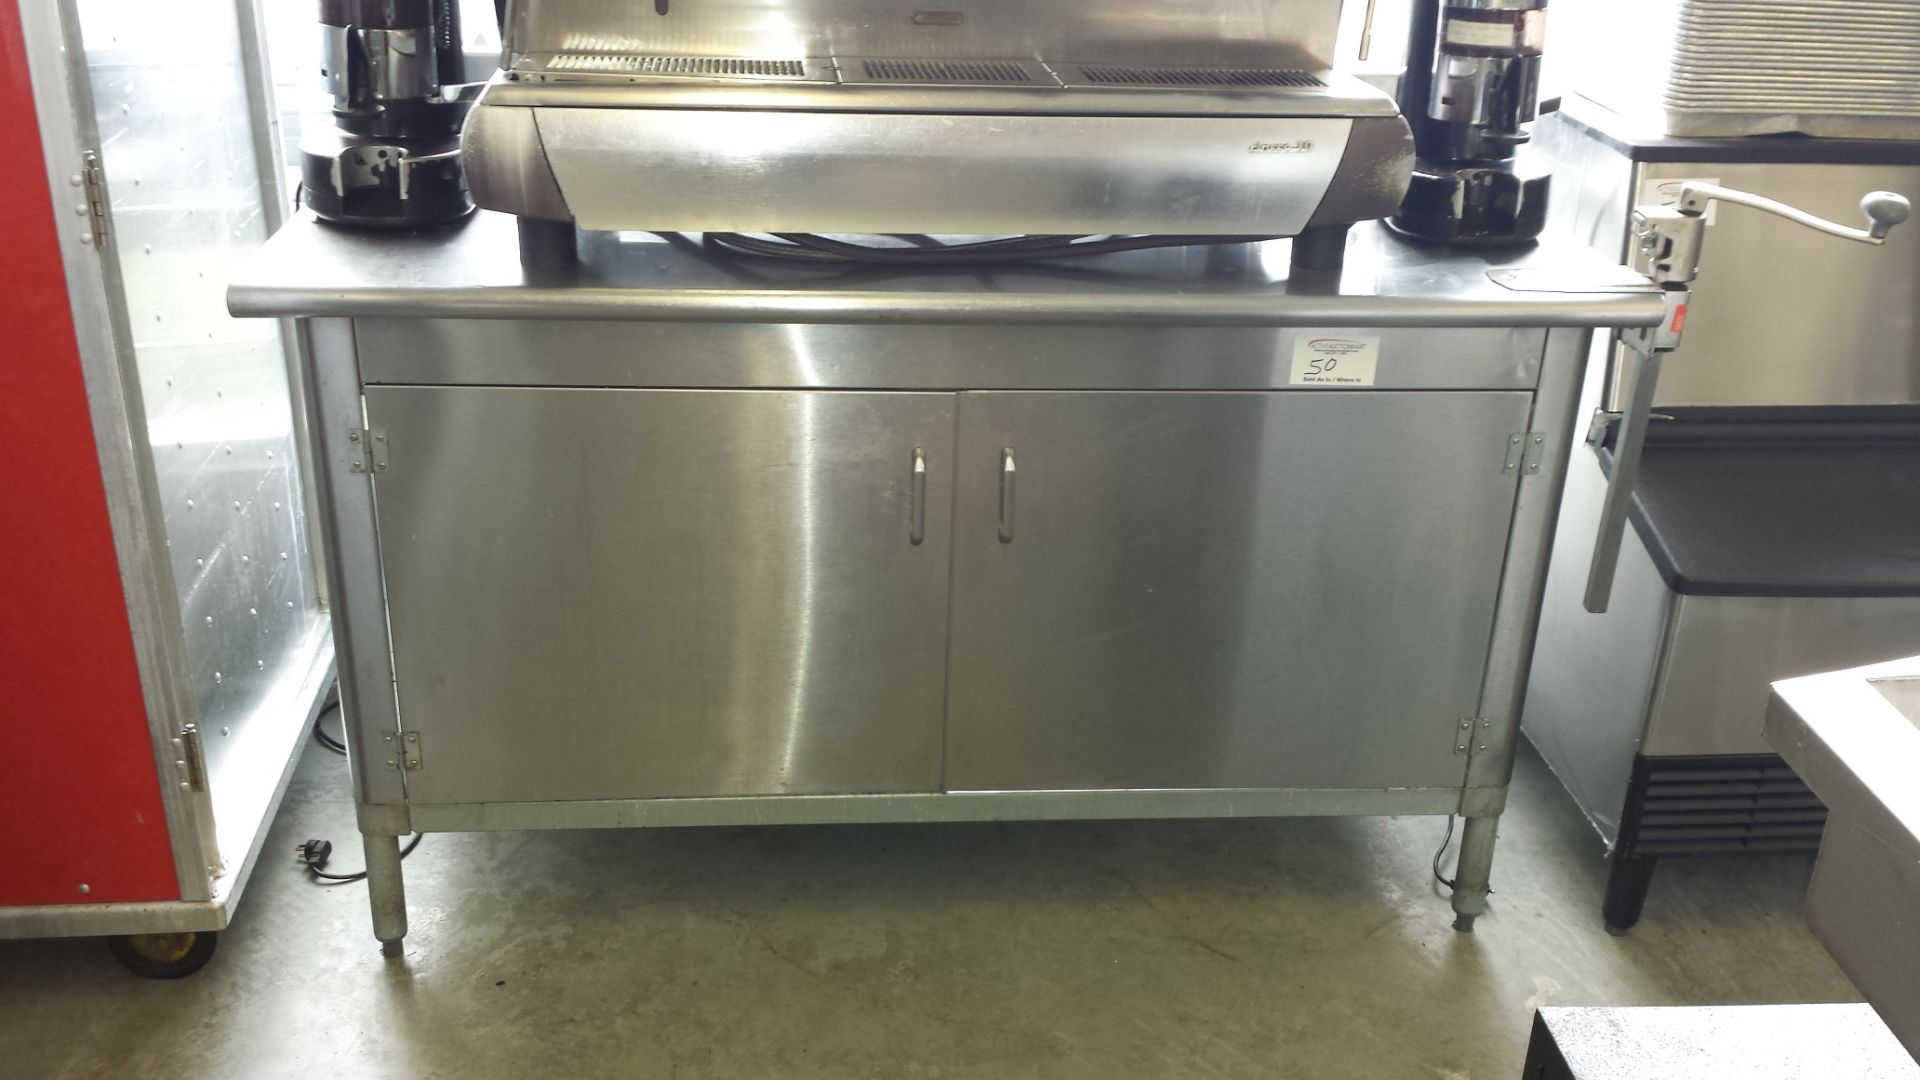 60 x 30" custom stainless steel table with backsplash, 2 doors and Edlund can opener